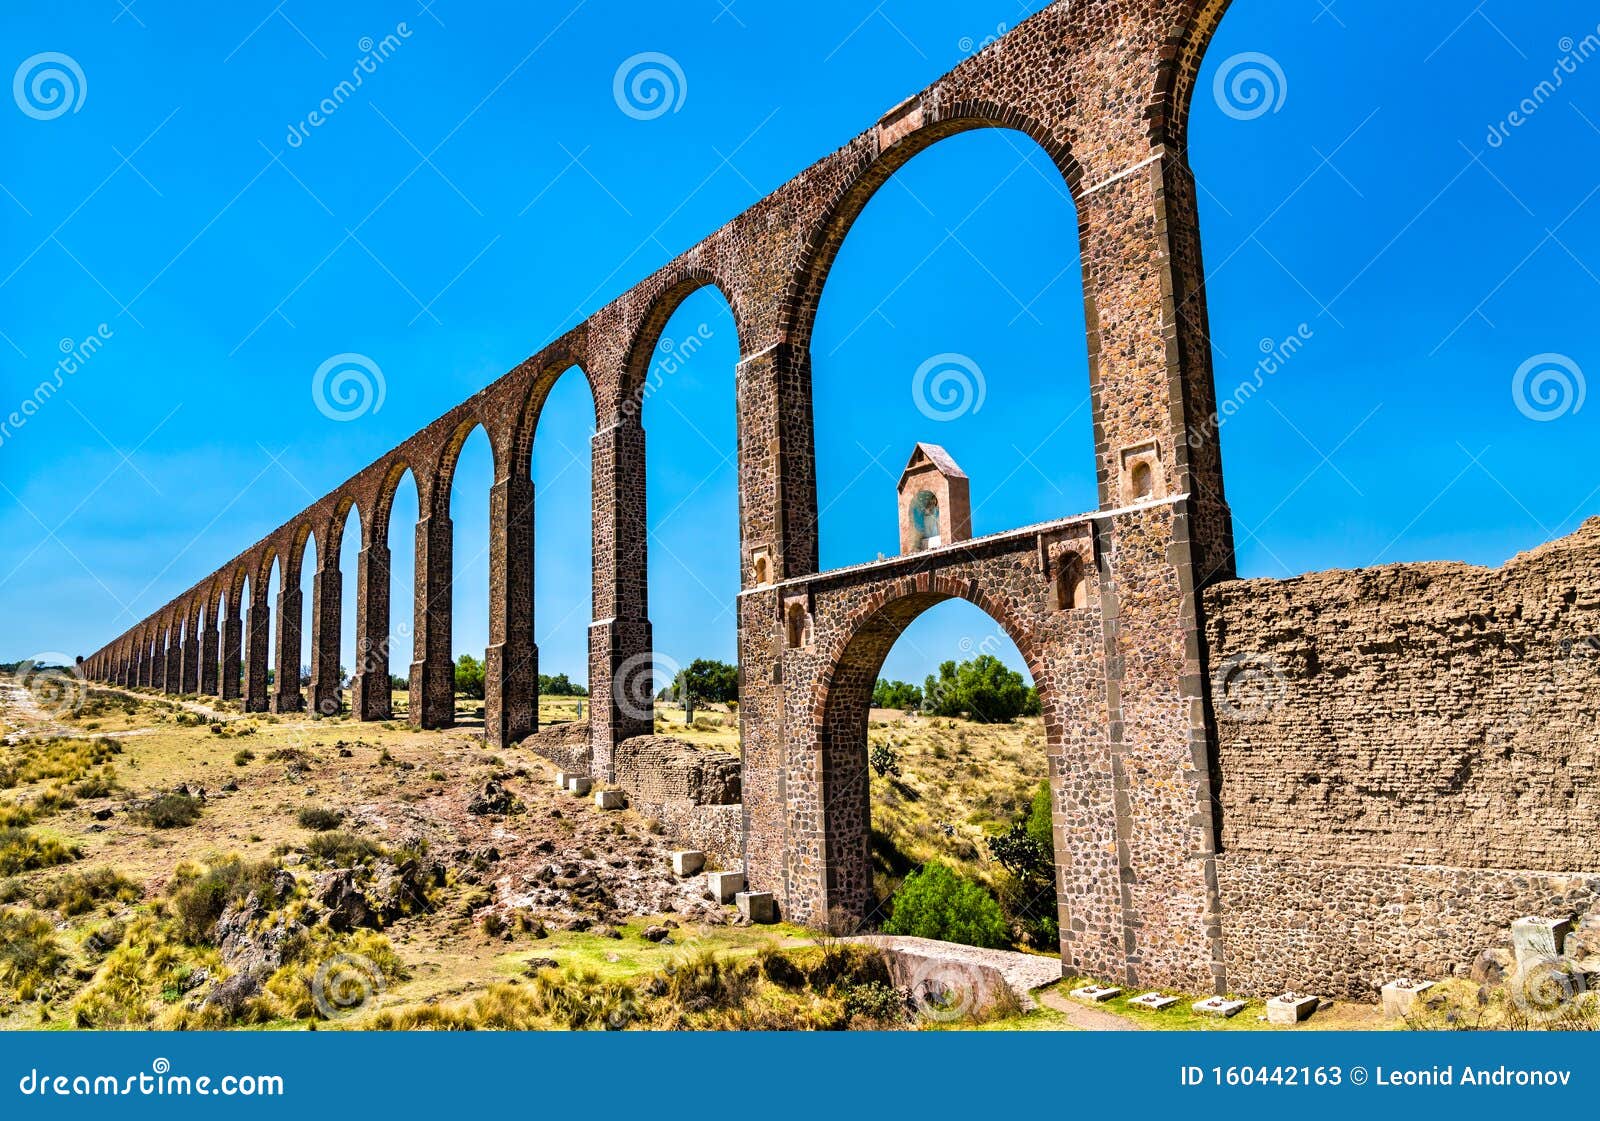 Aqueduct of Padre Tembleque in Mexico Stock Image - Image of padre,  cityscape: 160442163